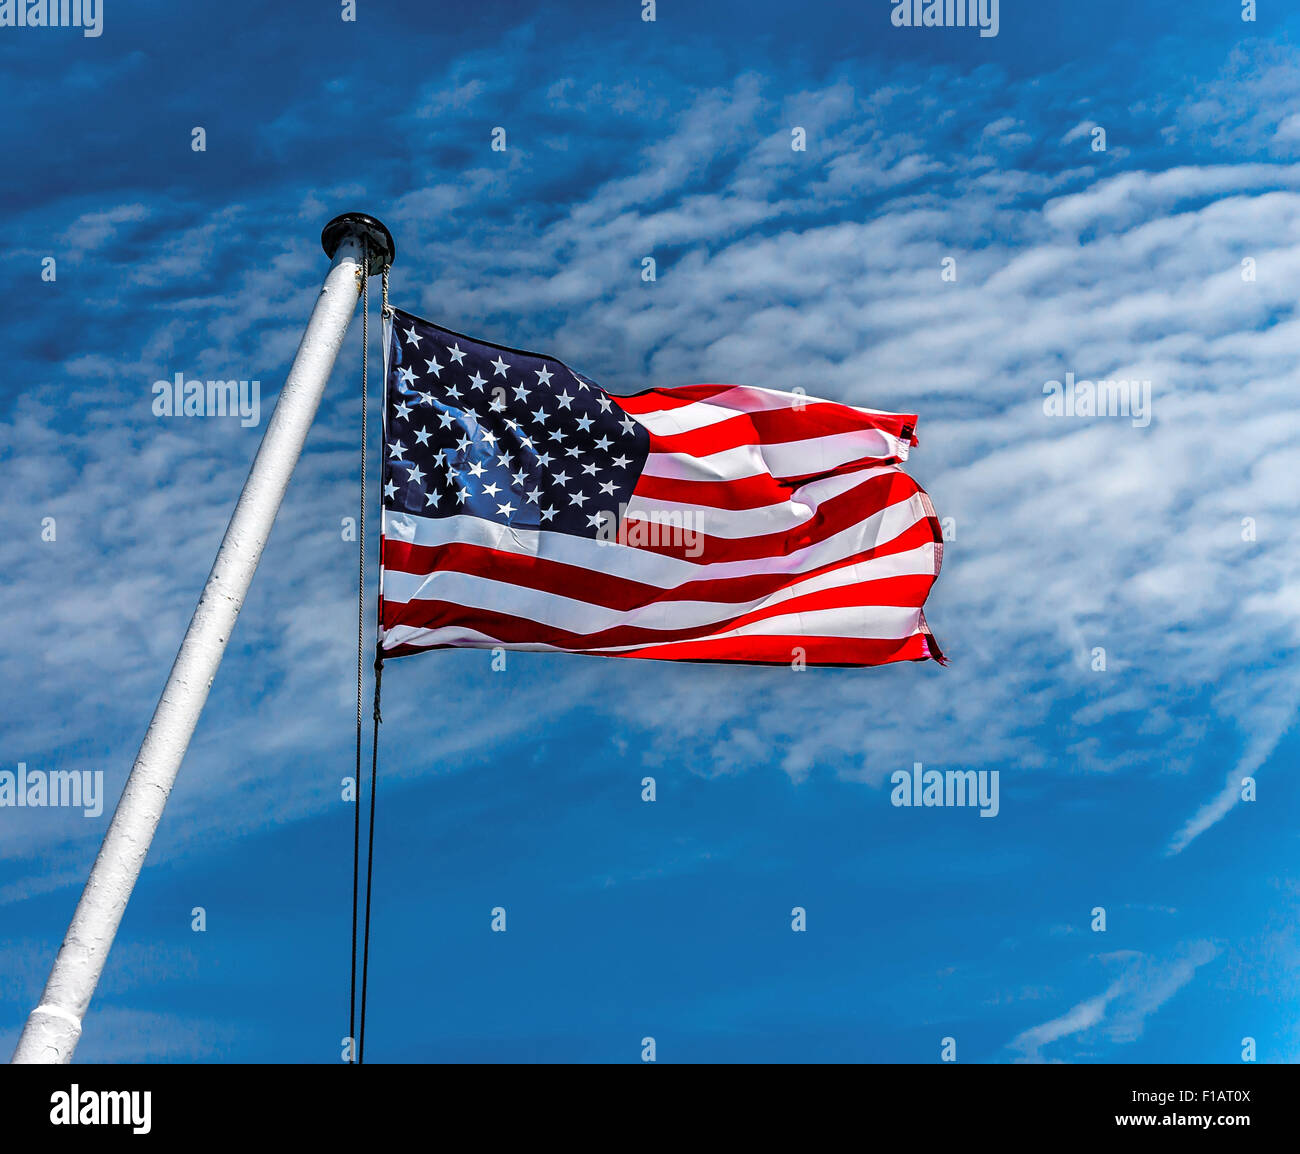 American flag flying against a blue sky. Stock Photo